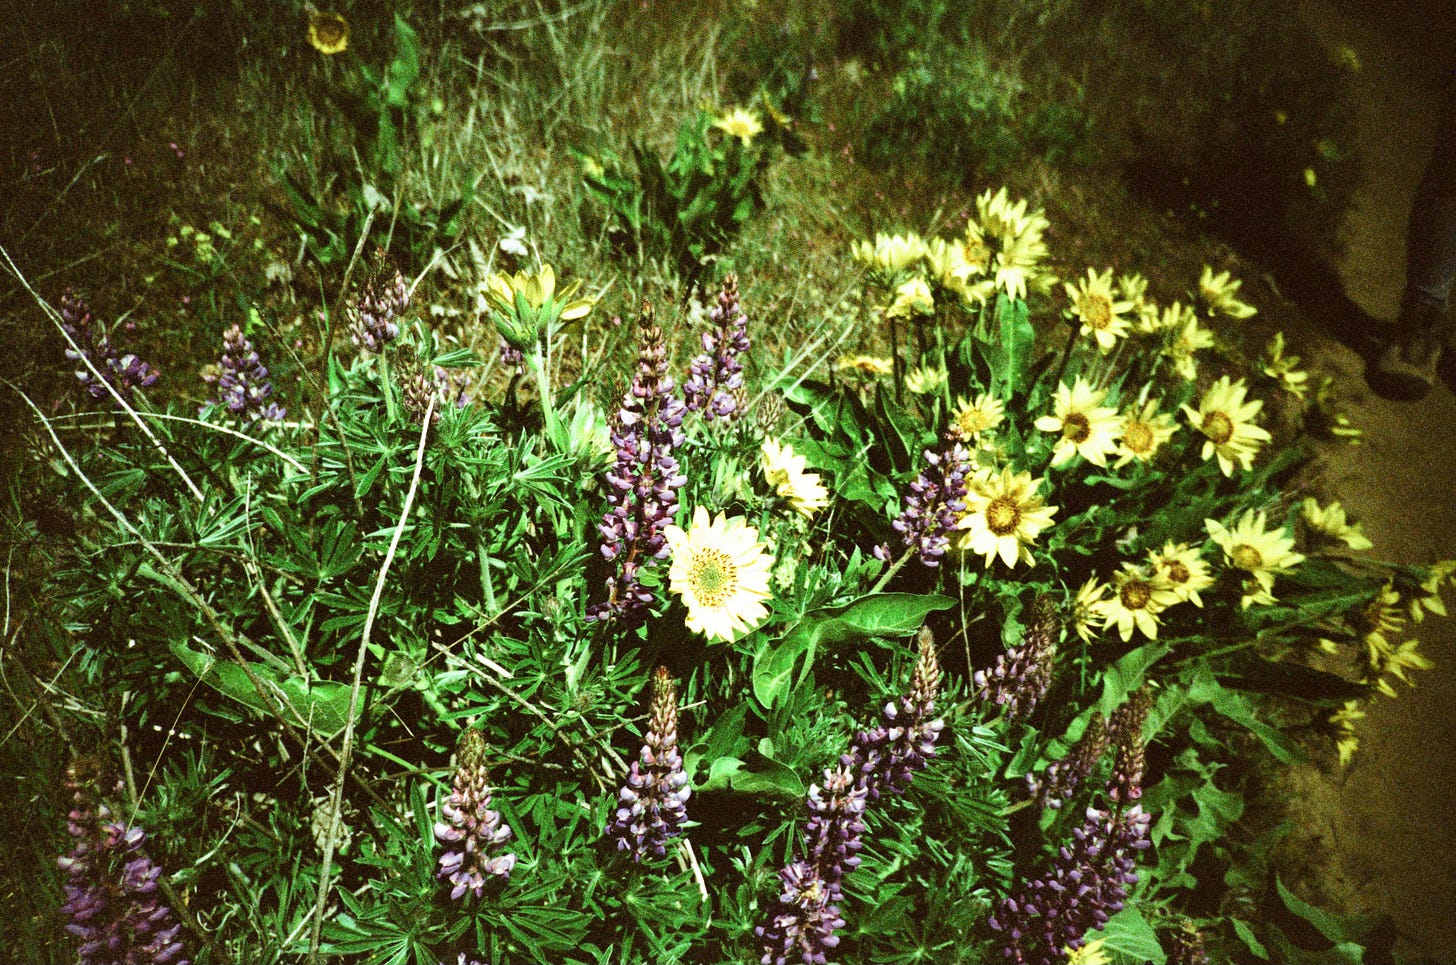 A bright photo of purple and yellow flowers.